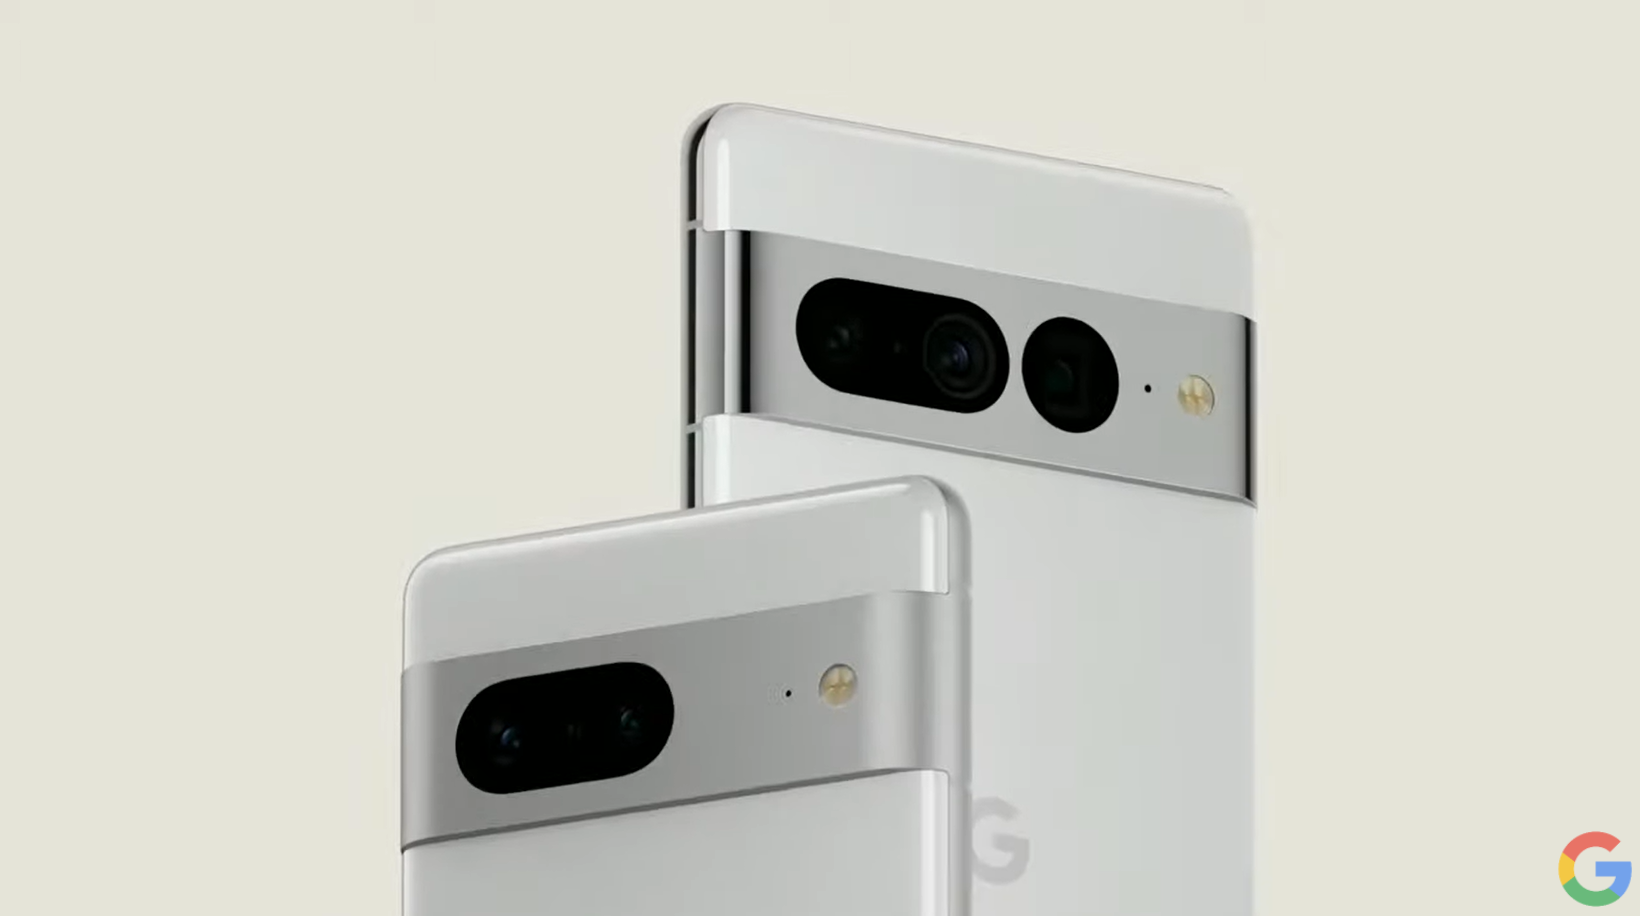 A screengrab from Google IO 2022 showing the Google Pixel 7